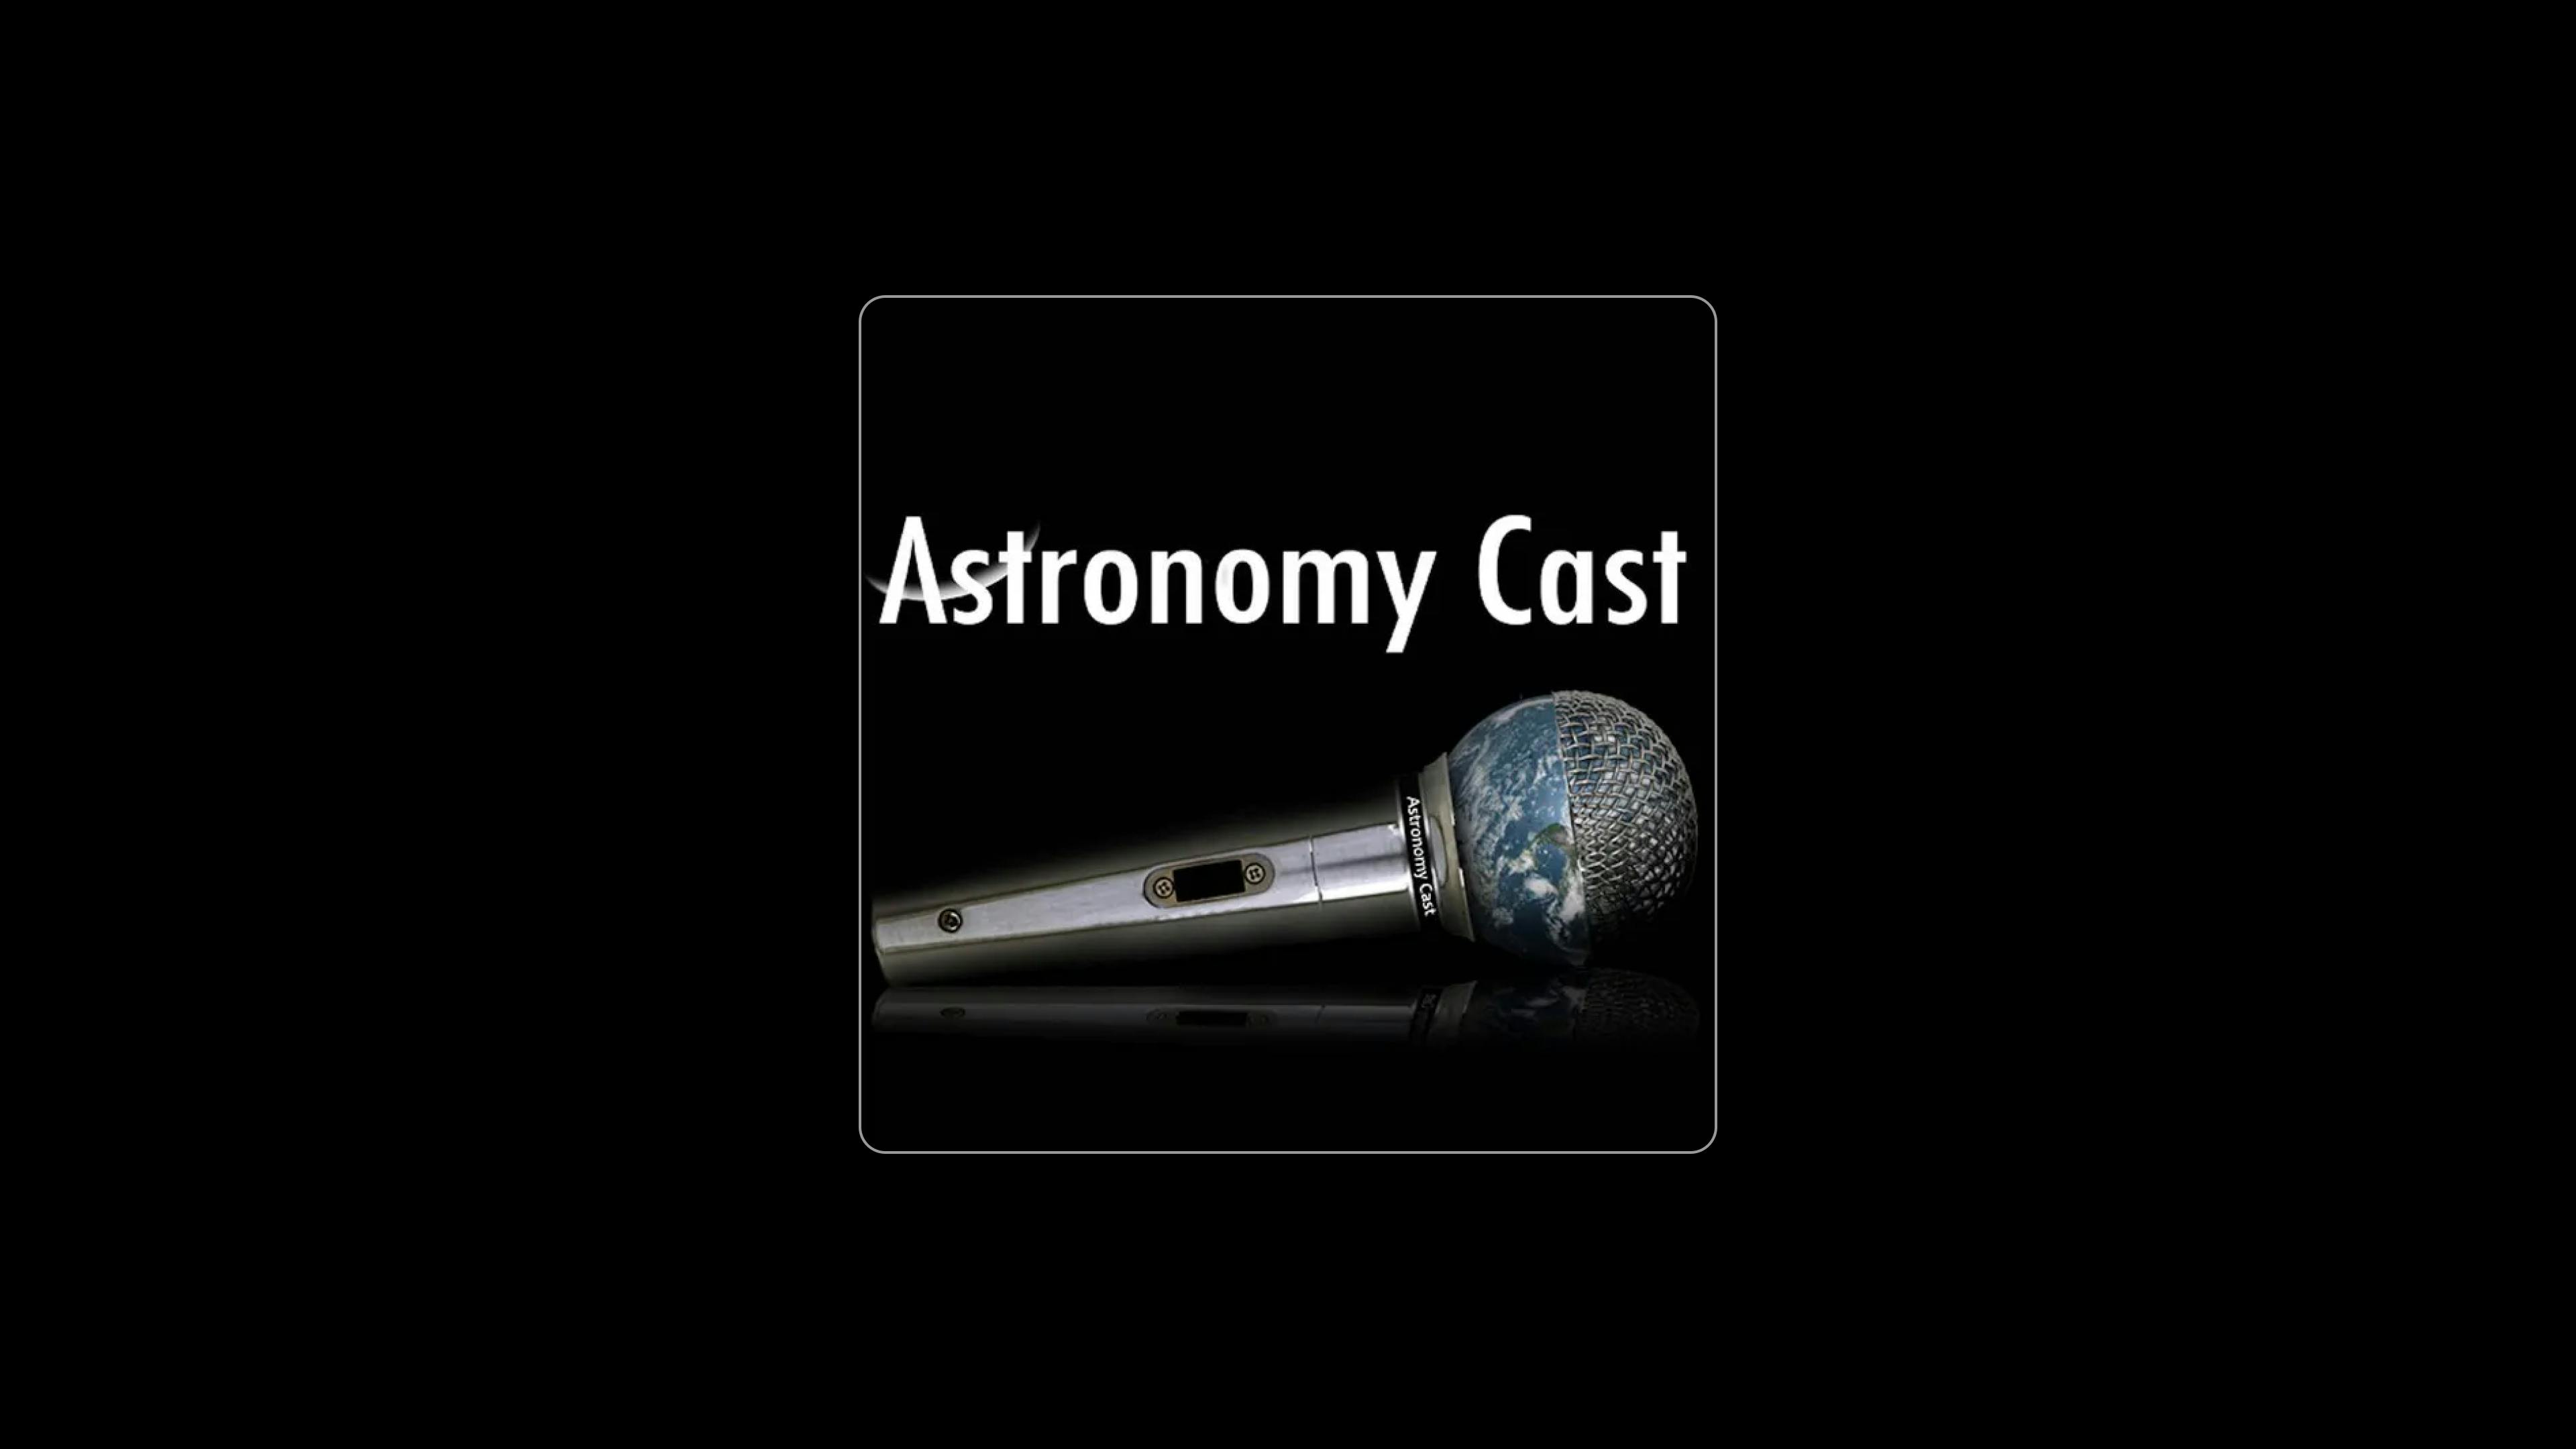 Astronomy Cast space podcast